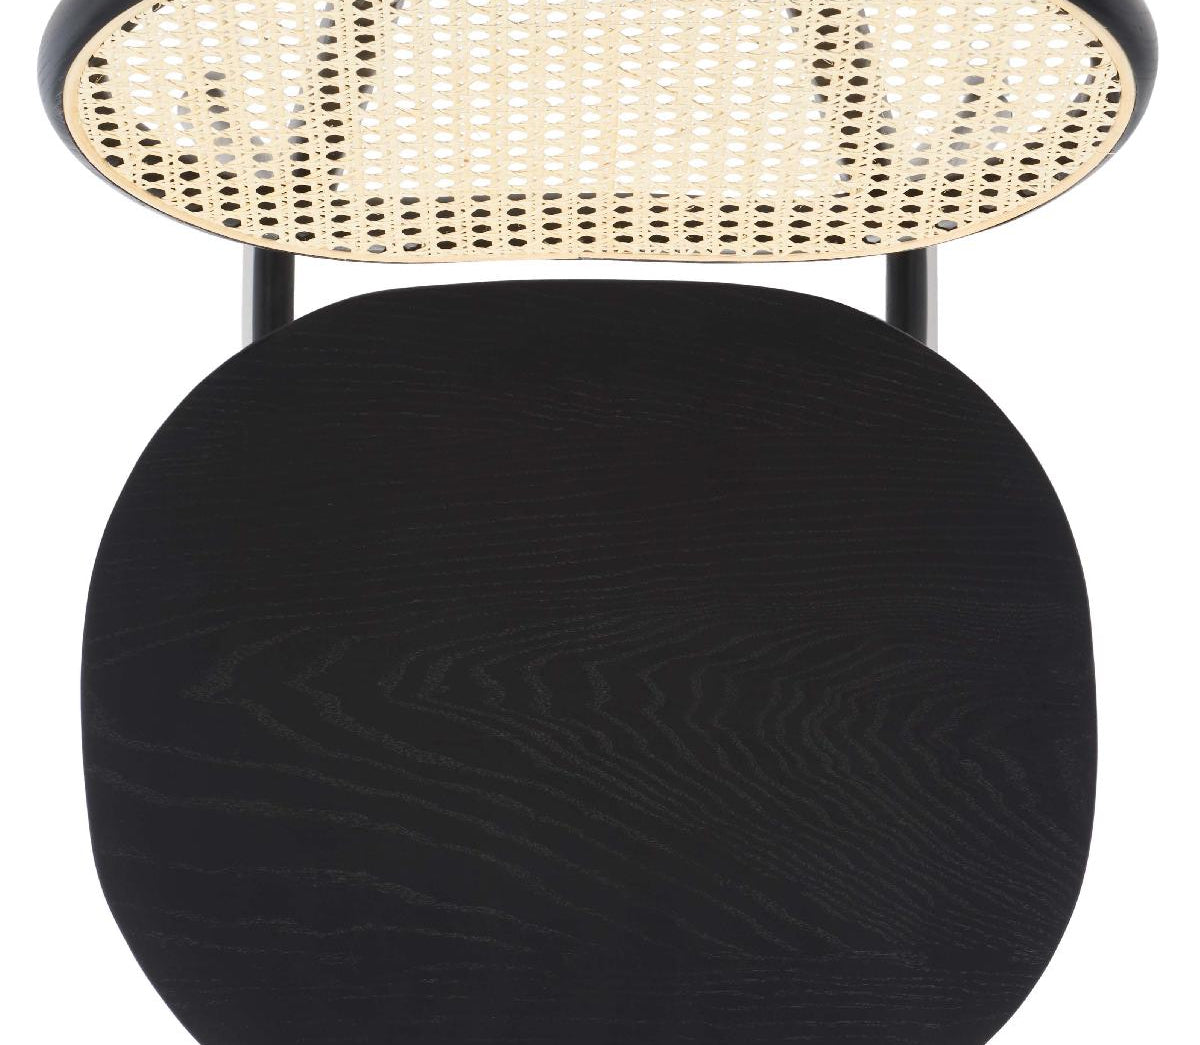 Safavieh Couture Kristianna Rattan Back Dining Chair(Set of 2) , SFV4127 - Black / Natural